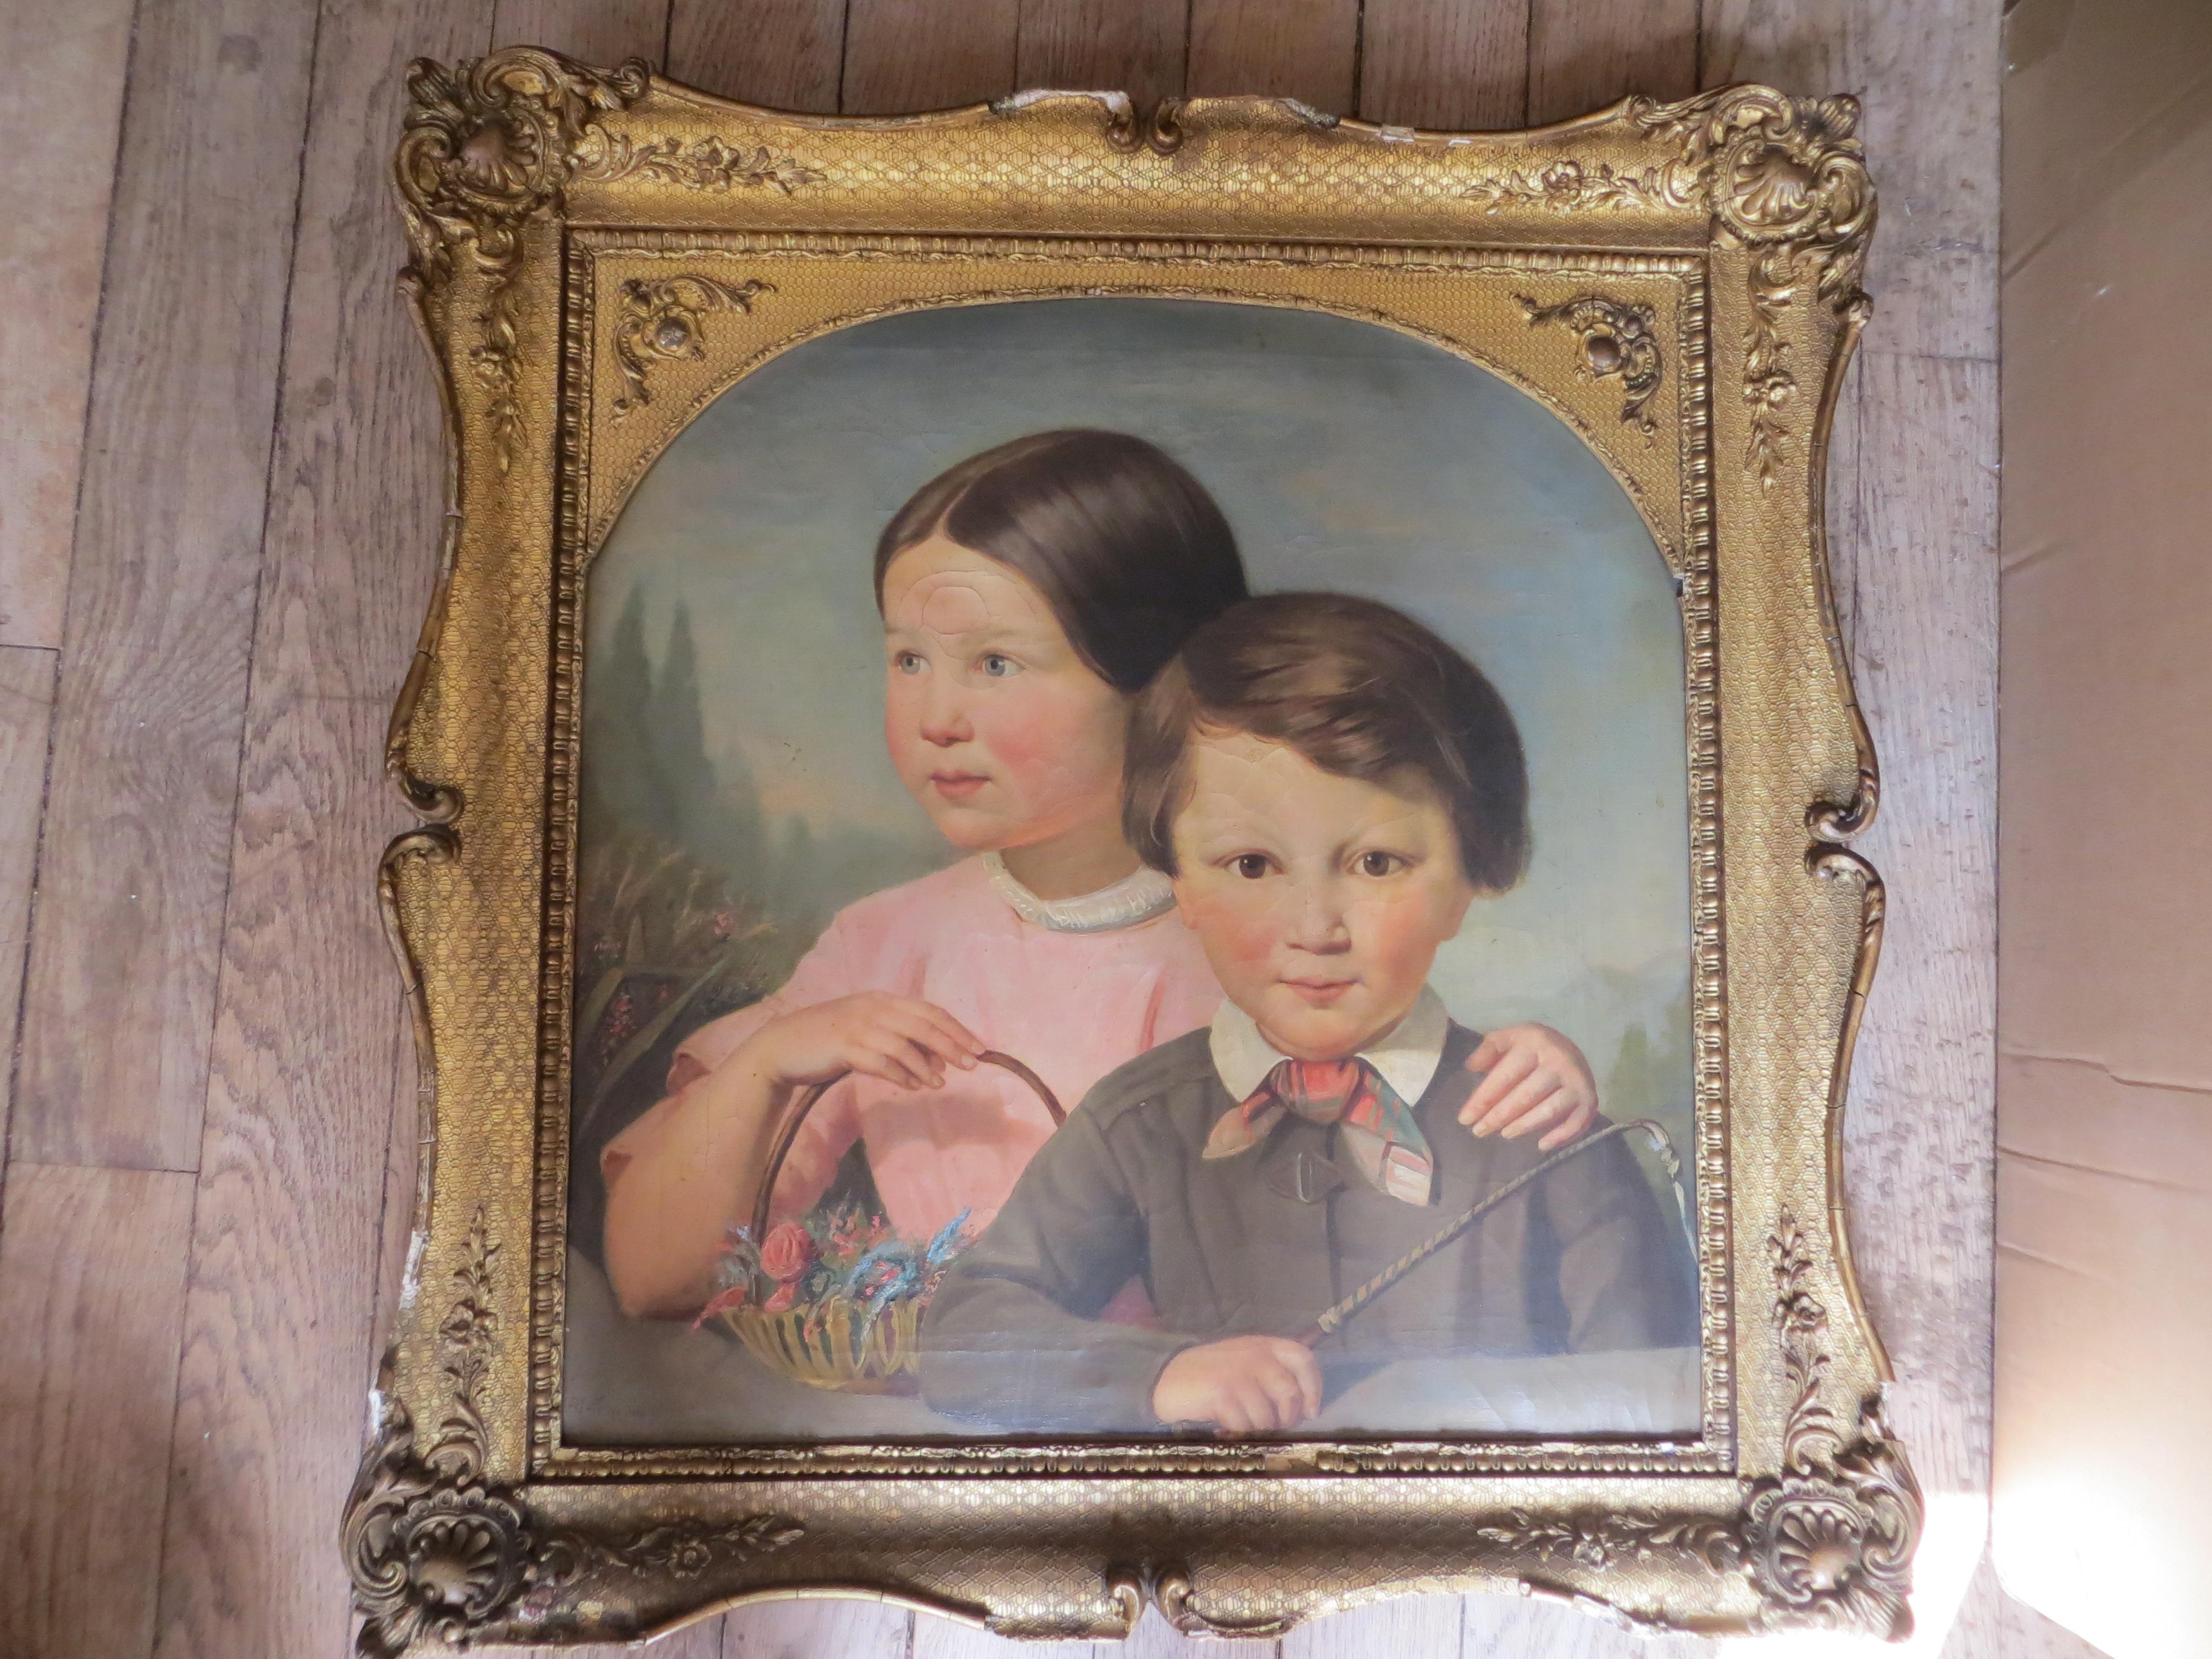  Very nice painting framed.O il on canvas depicting two young children boy and girl in a romantic style circa 1860 signed V. Tahin lower left